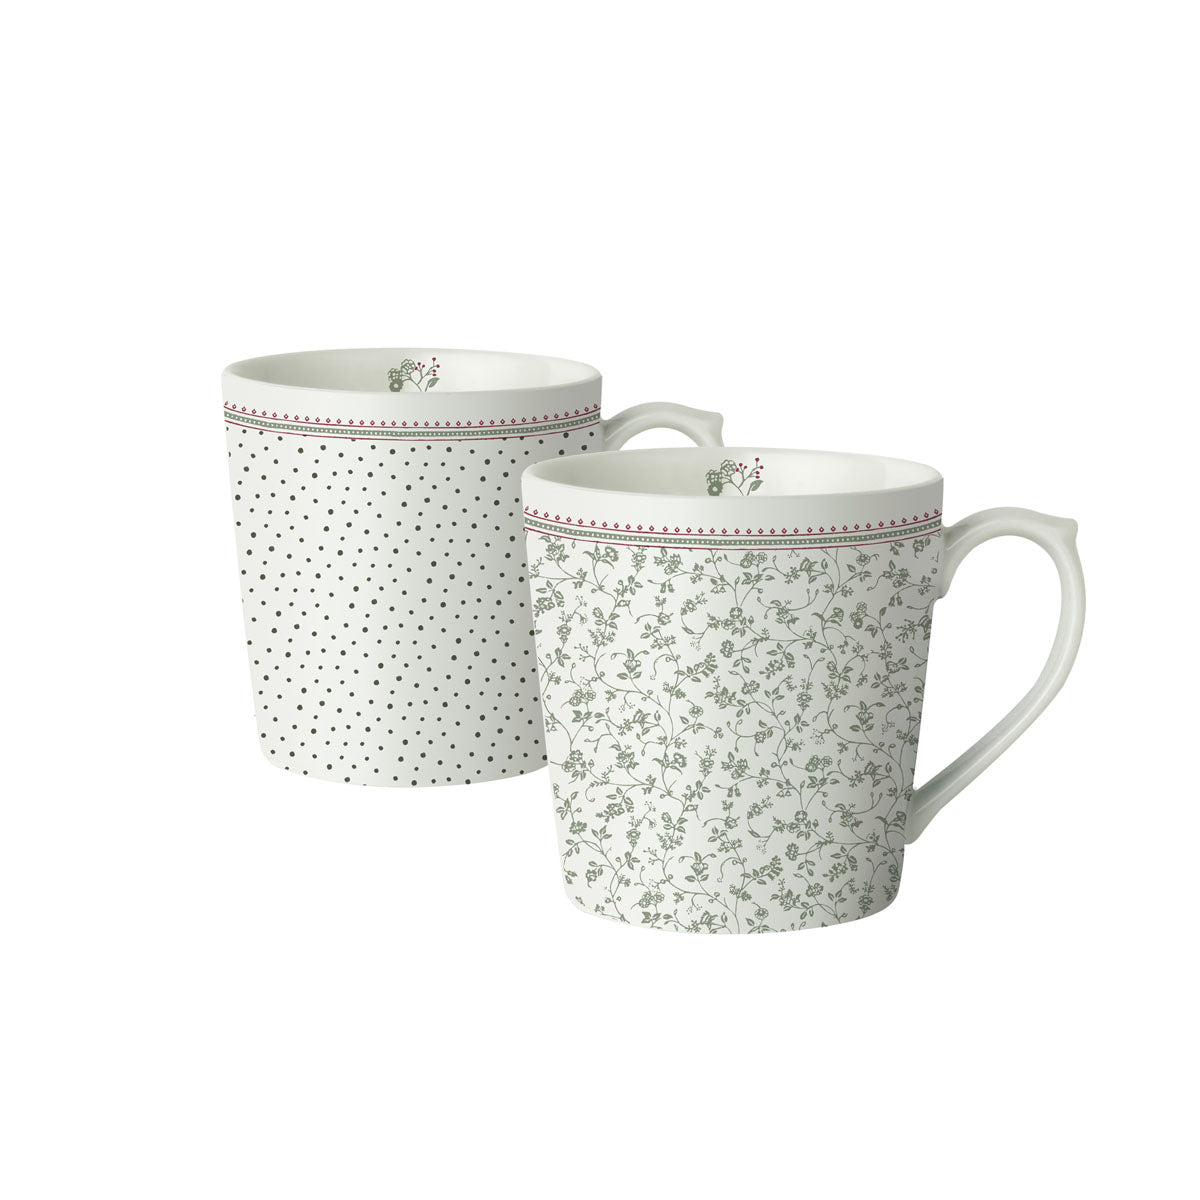 Laura Ashley Giftset 2 Mugs Dot and Green Flowers 32 cl.